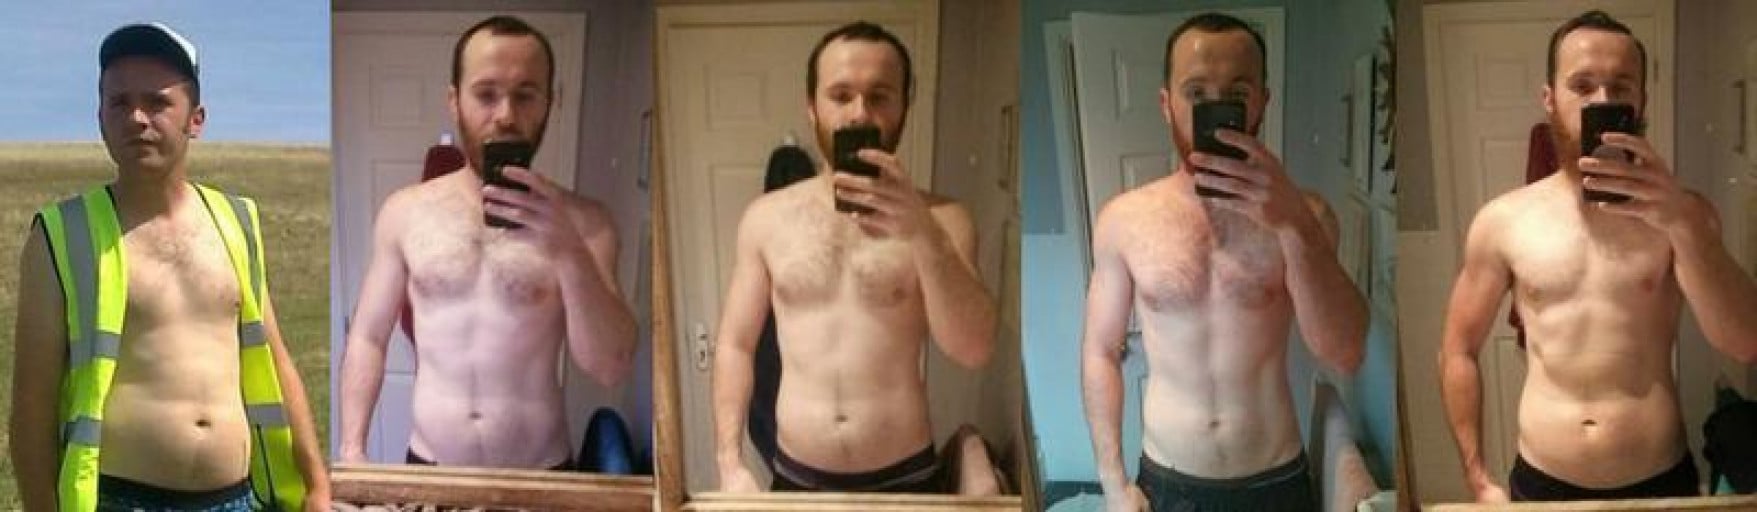 A 1.5 Year, 39Lb Weight Loss Journey: Compilation of Reddit User's Progress